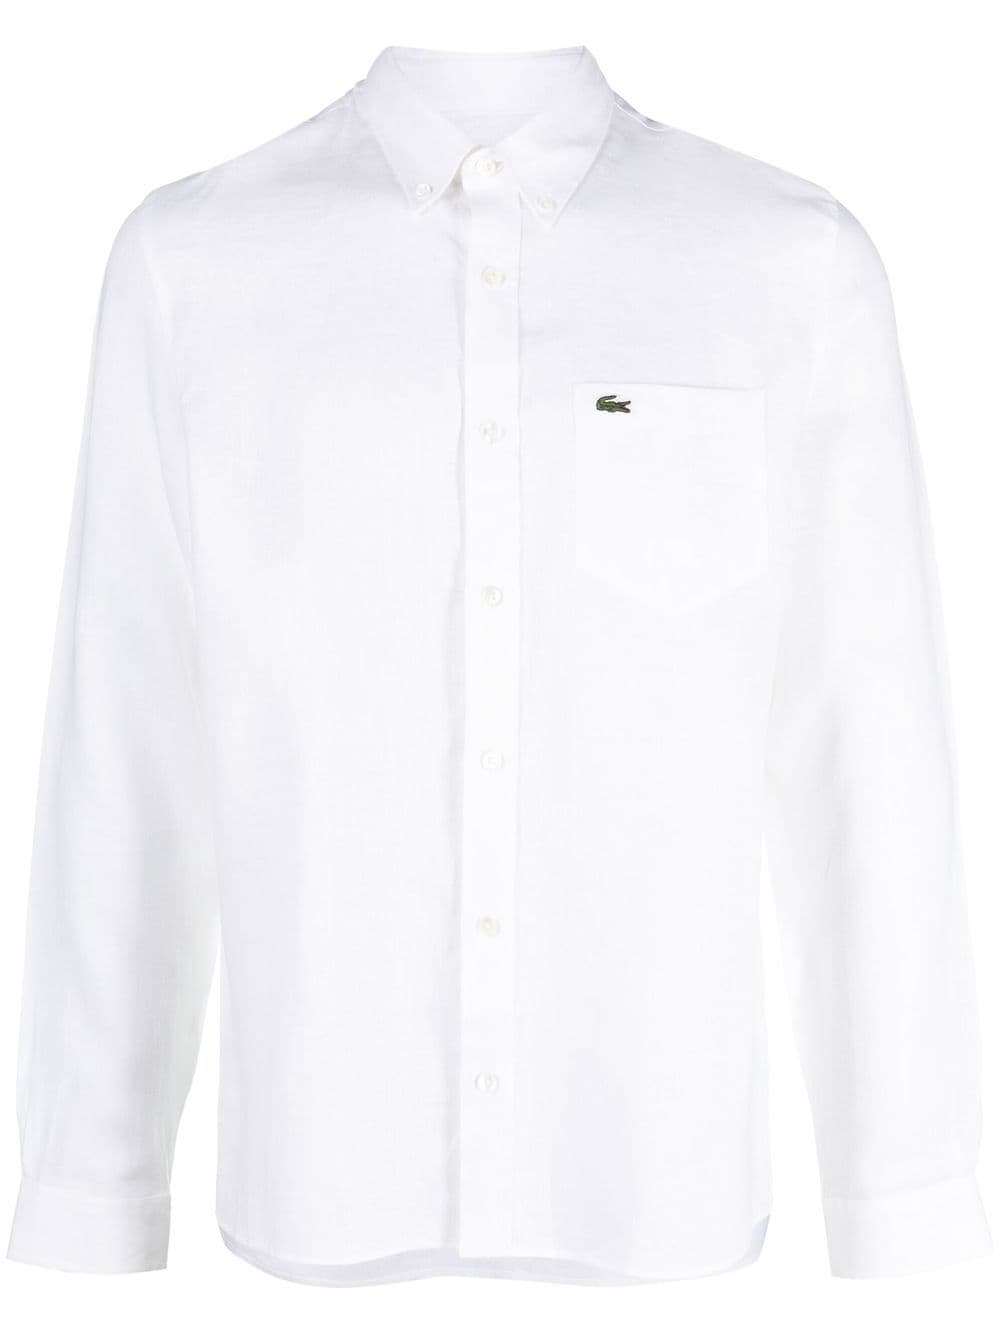 Logo-embroidered button-down shirt<BR/><BR/>